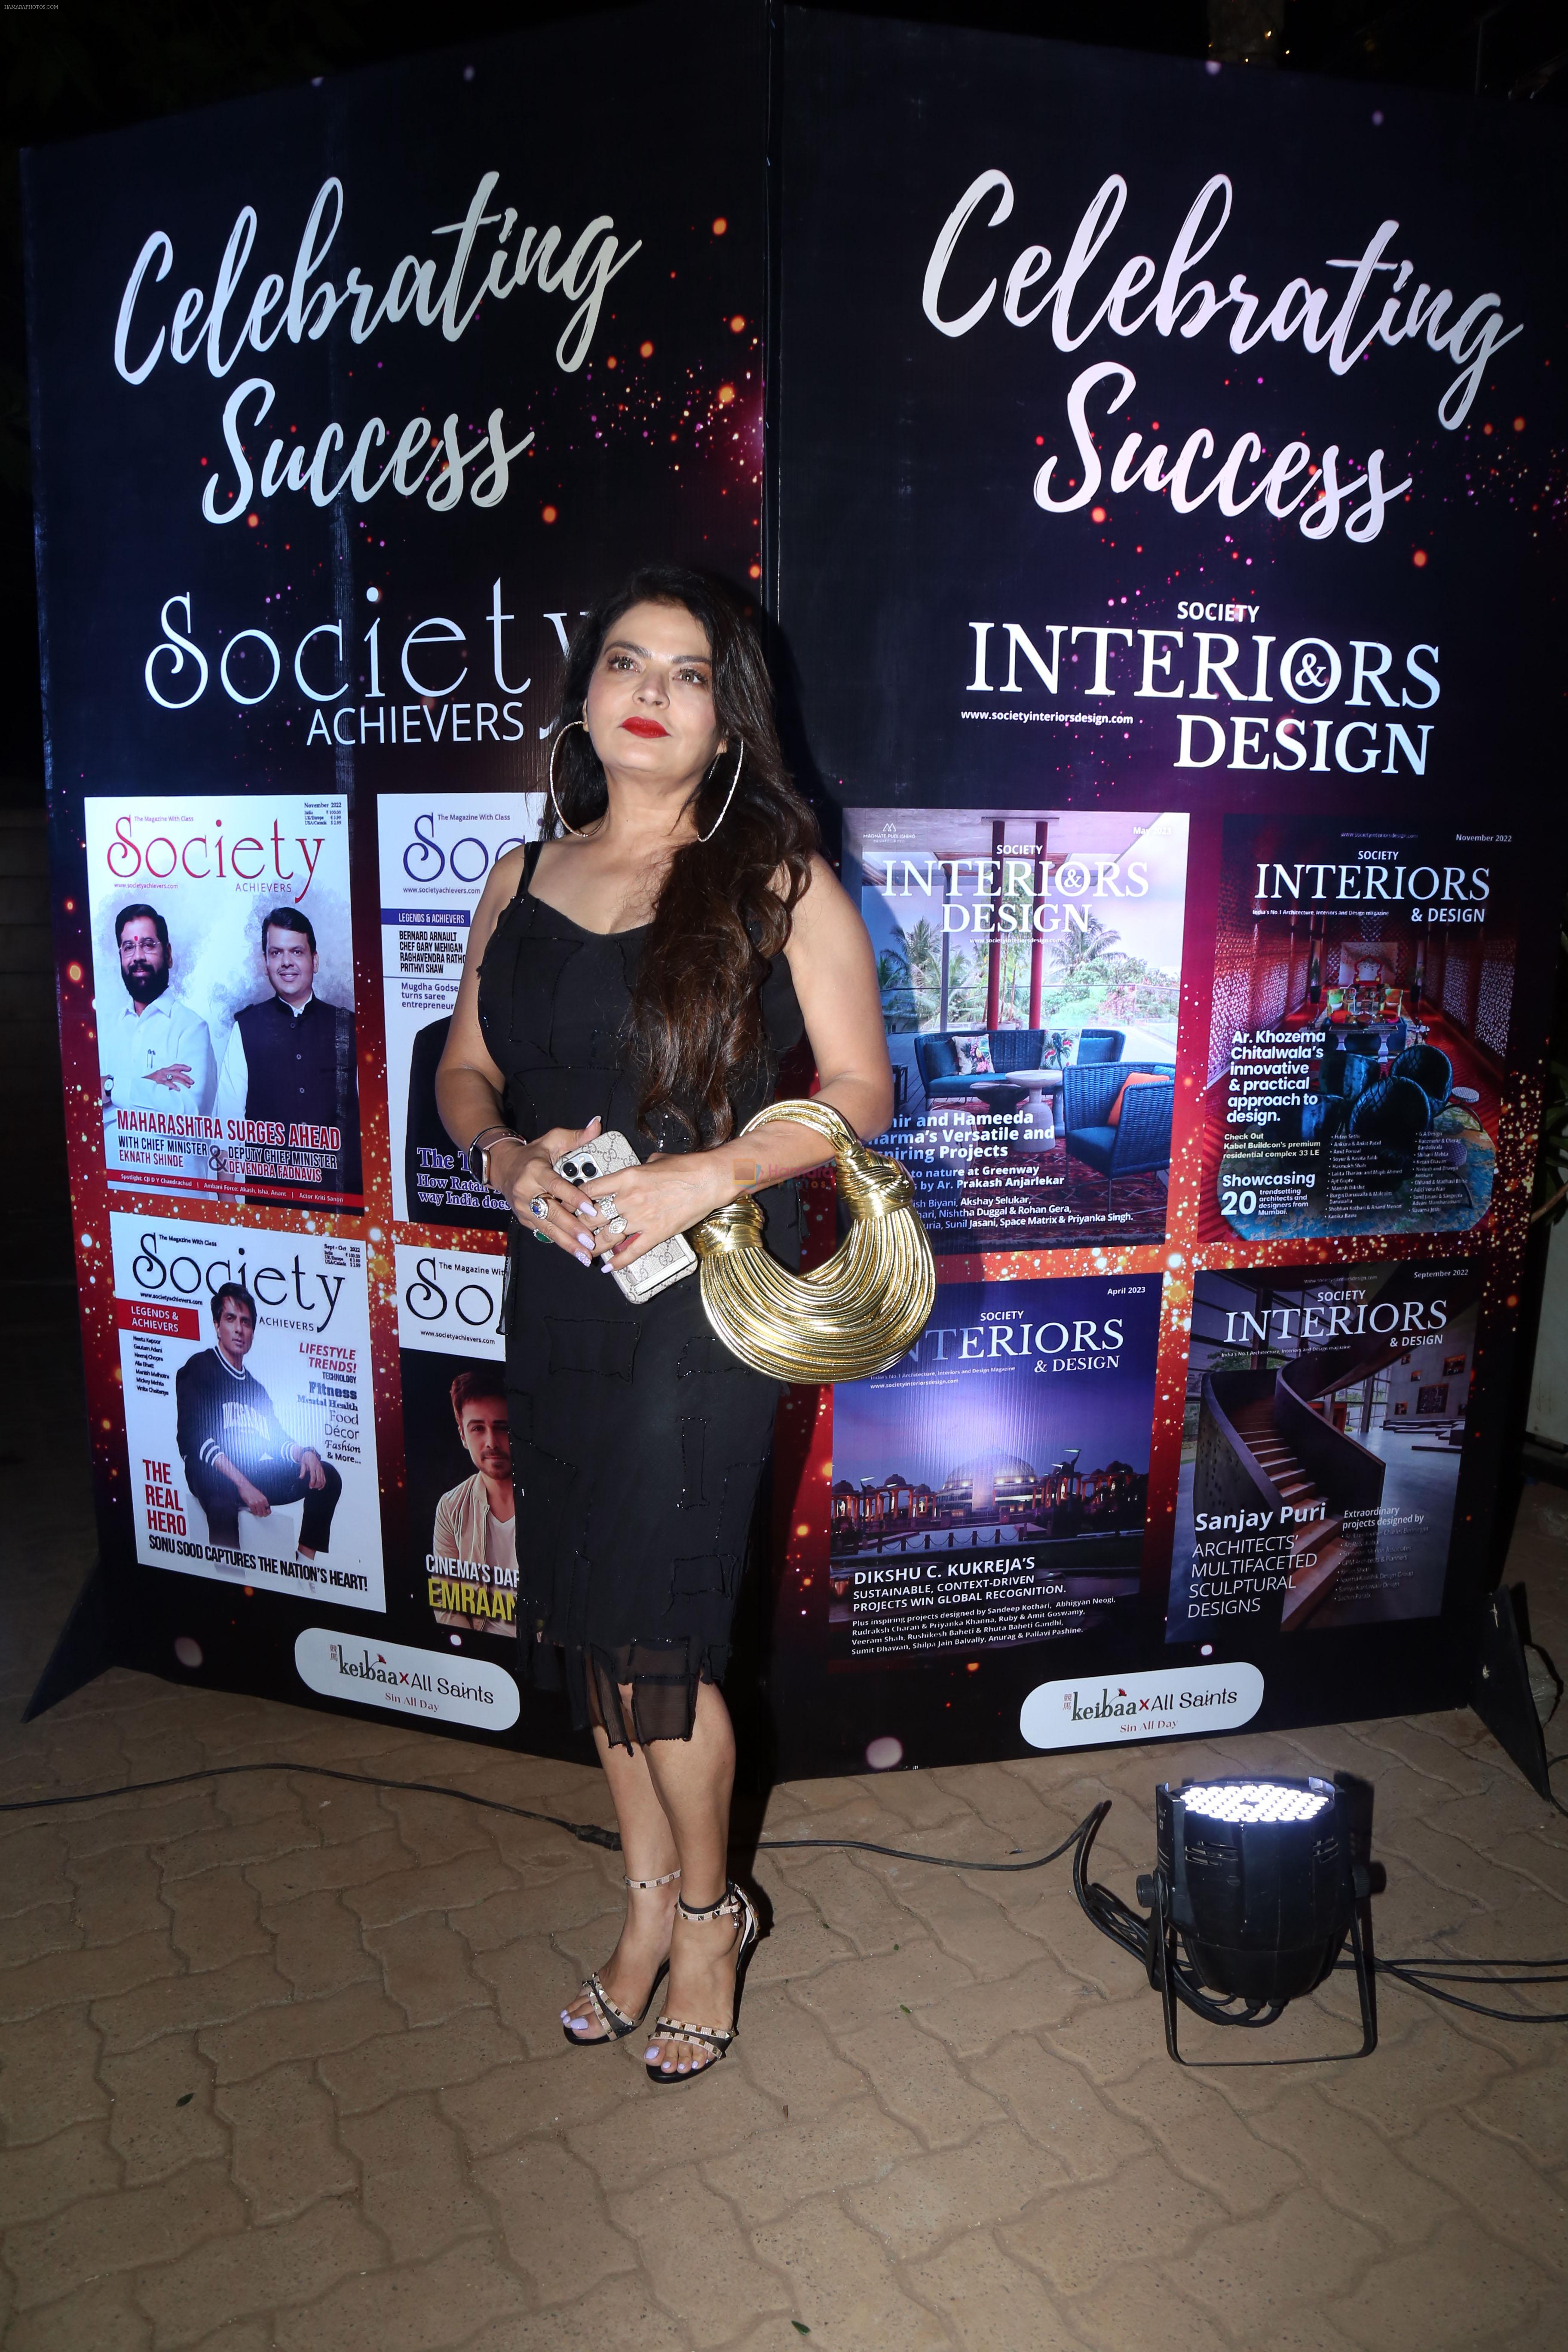 Sheeba at the ReOpening of Keibaa X All Saints and Celebration of Society Achievers and Society Interiors and Design Magazine